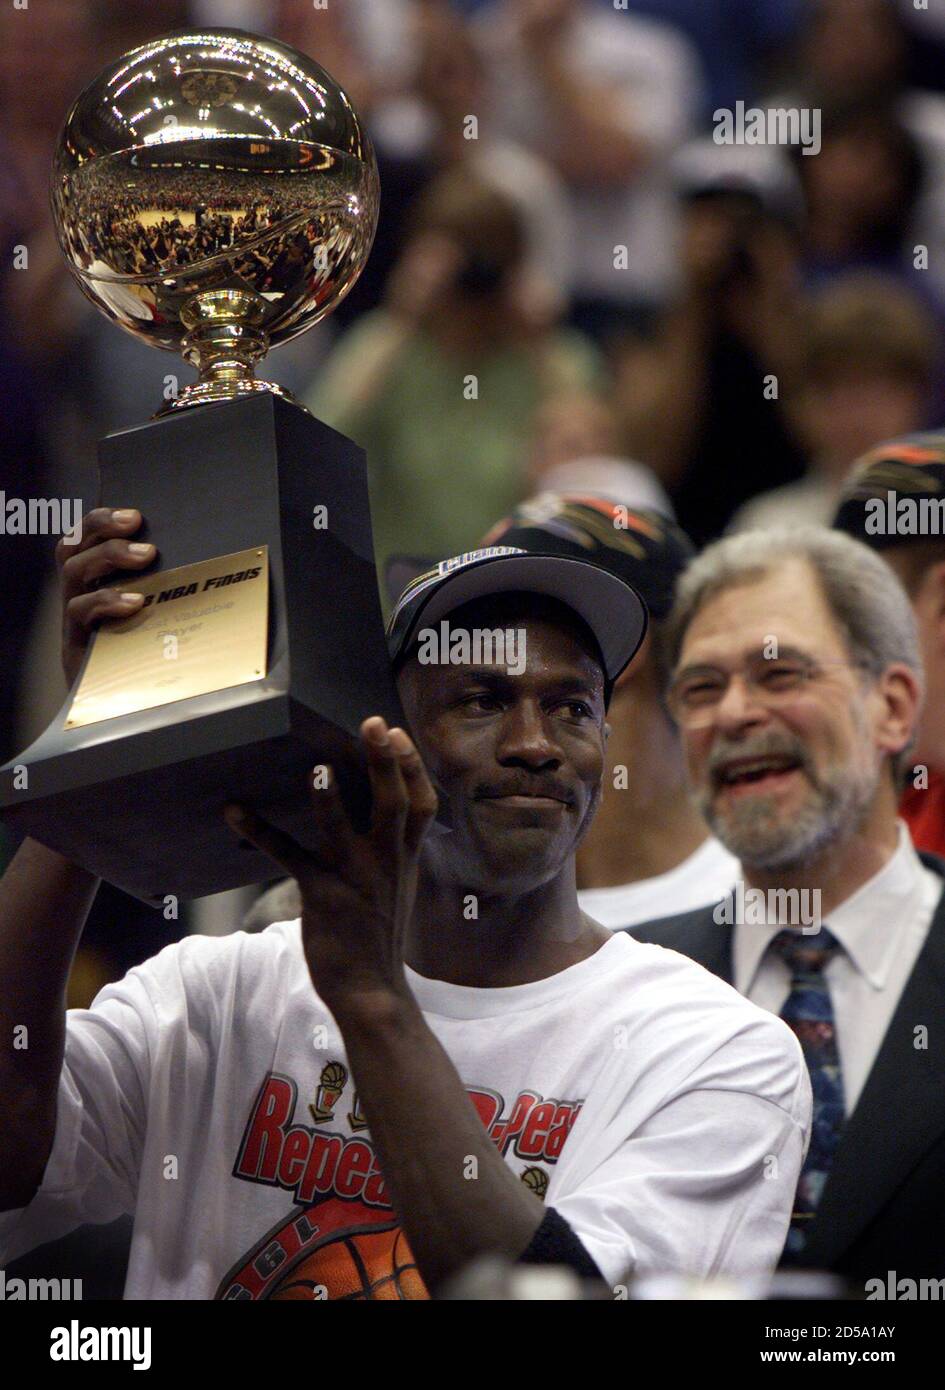 Chicago Bulls Michael Jordan holds up the MVP trophy in front of coach Phil Jackson after the Bulls defeated the Utah Jazz 87-86 win the NBA championship June 14, 1998. REUTERS/Mike